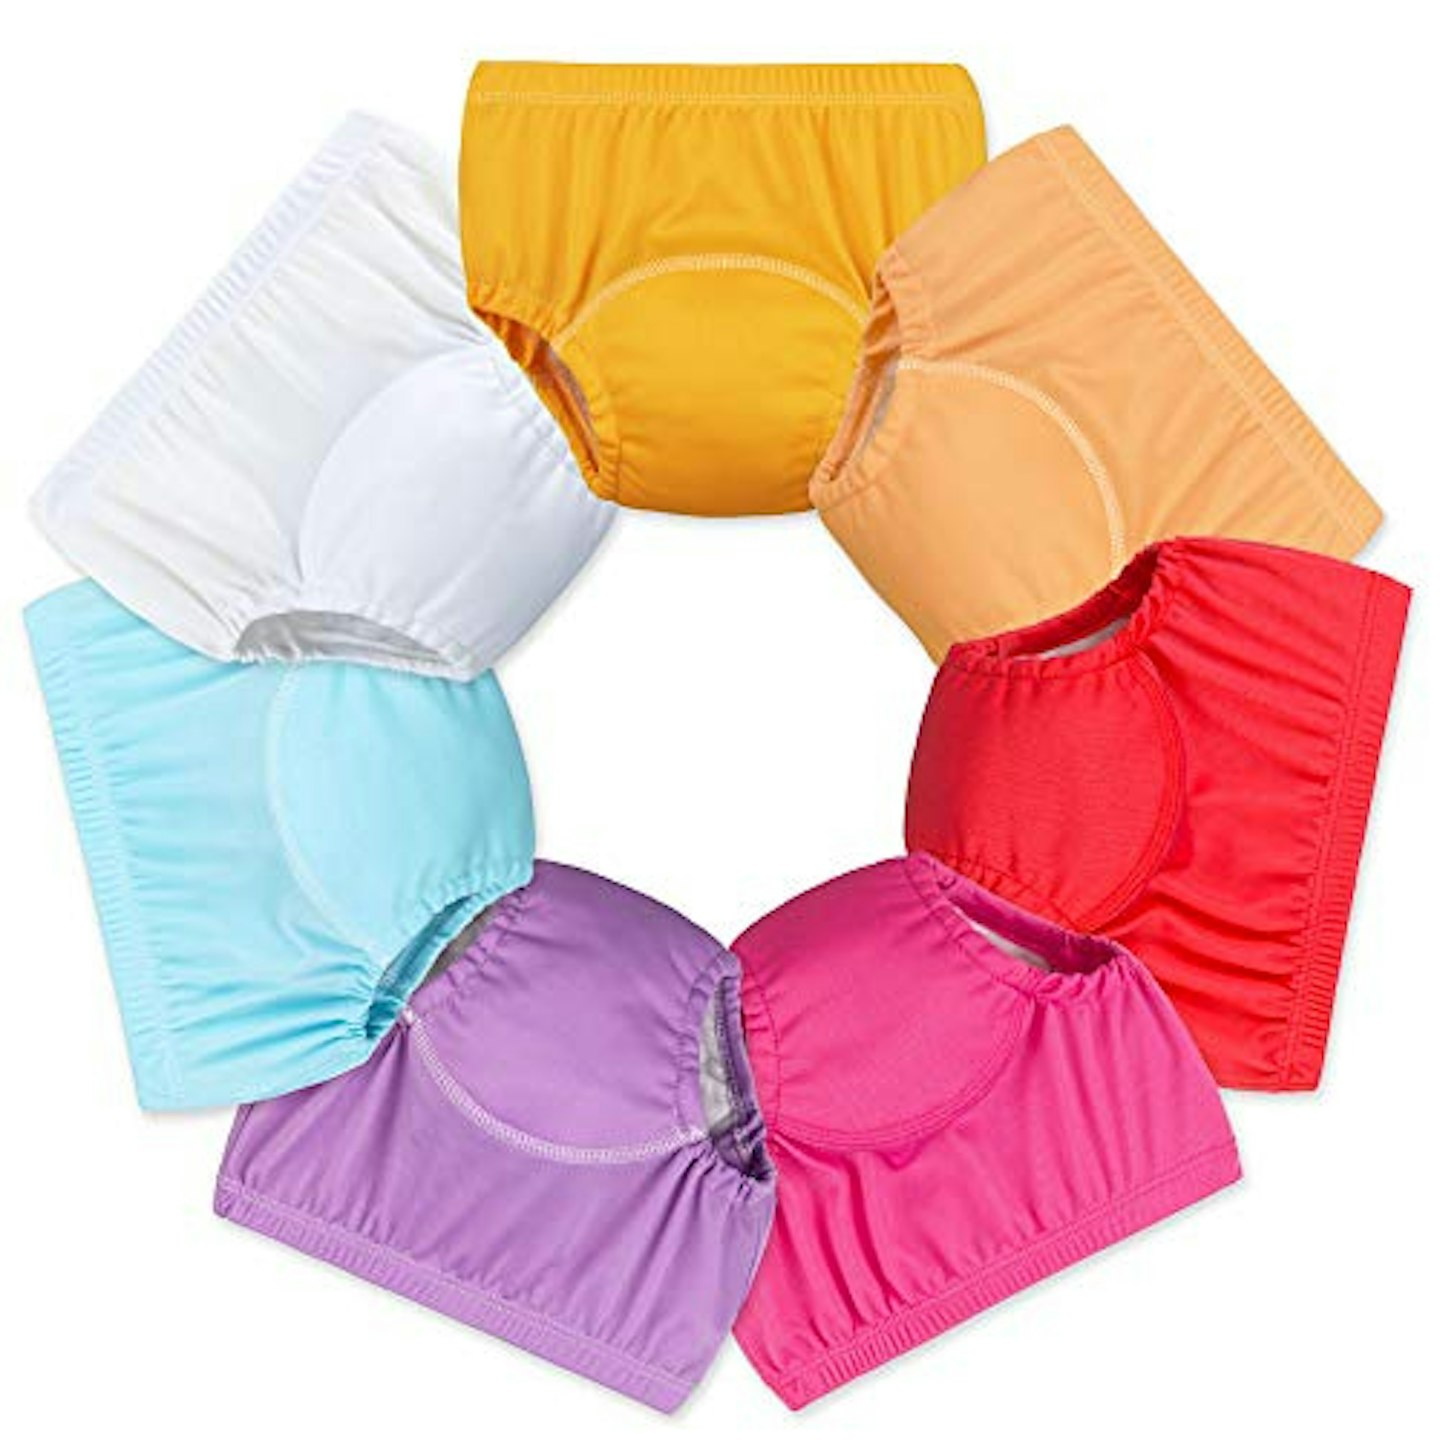  Baby Girls Training Pants Potty Reusable 5 Pack